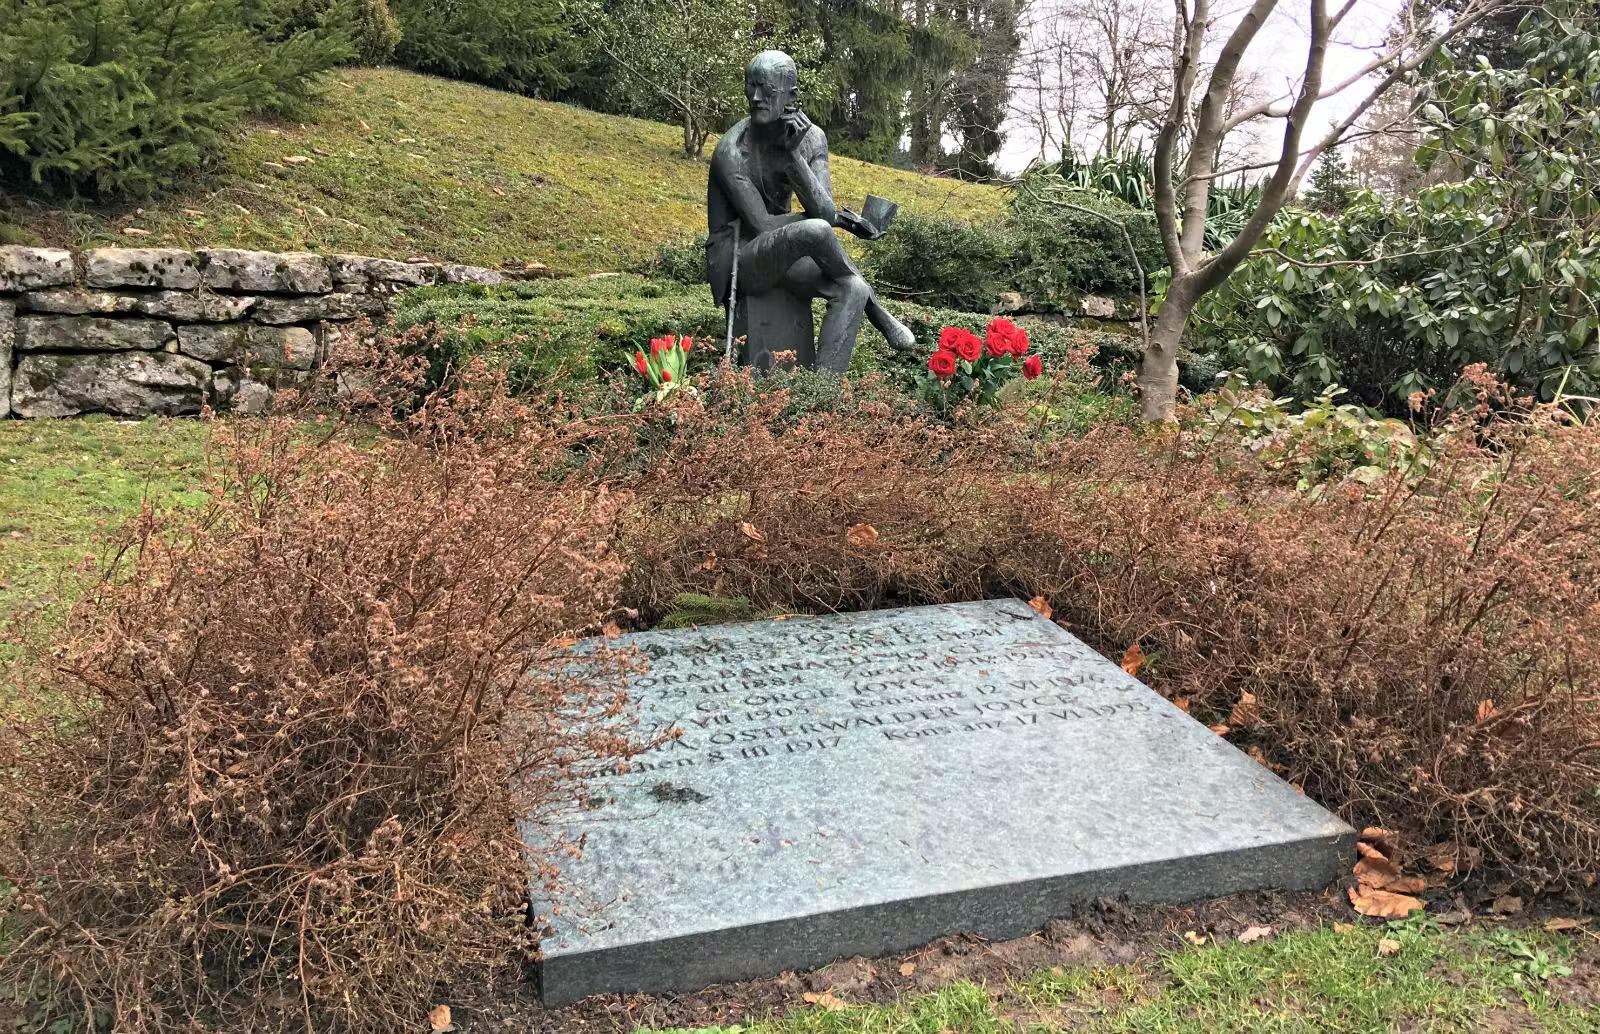 The grave of James Joyce in Zürich, Switzerland, complete with a statue of the author himself